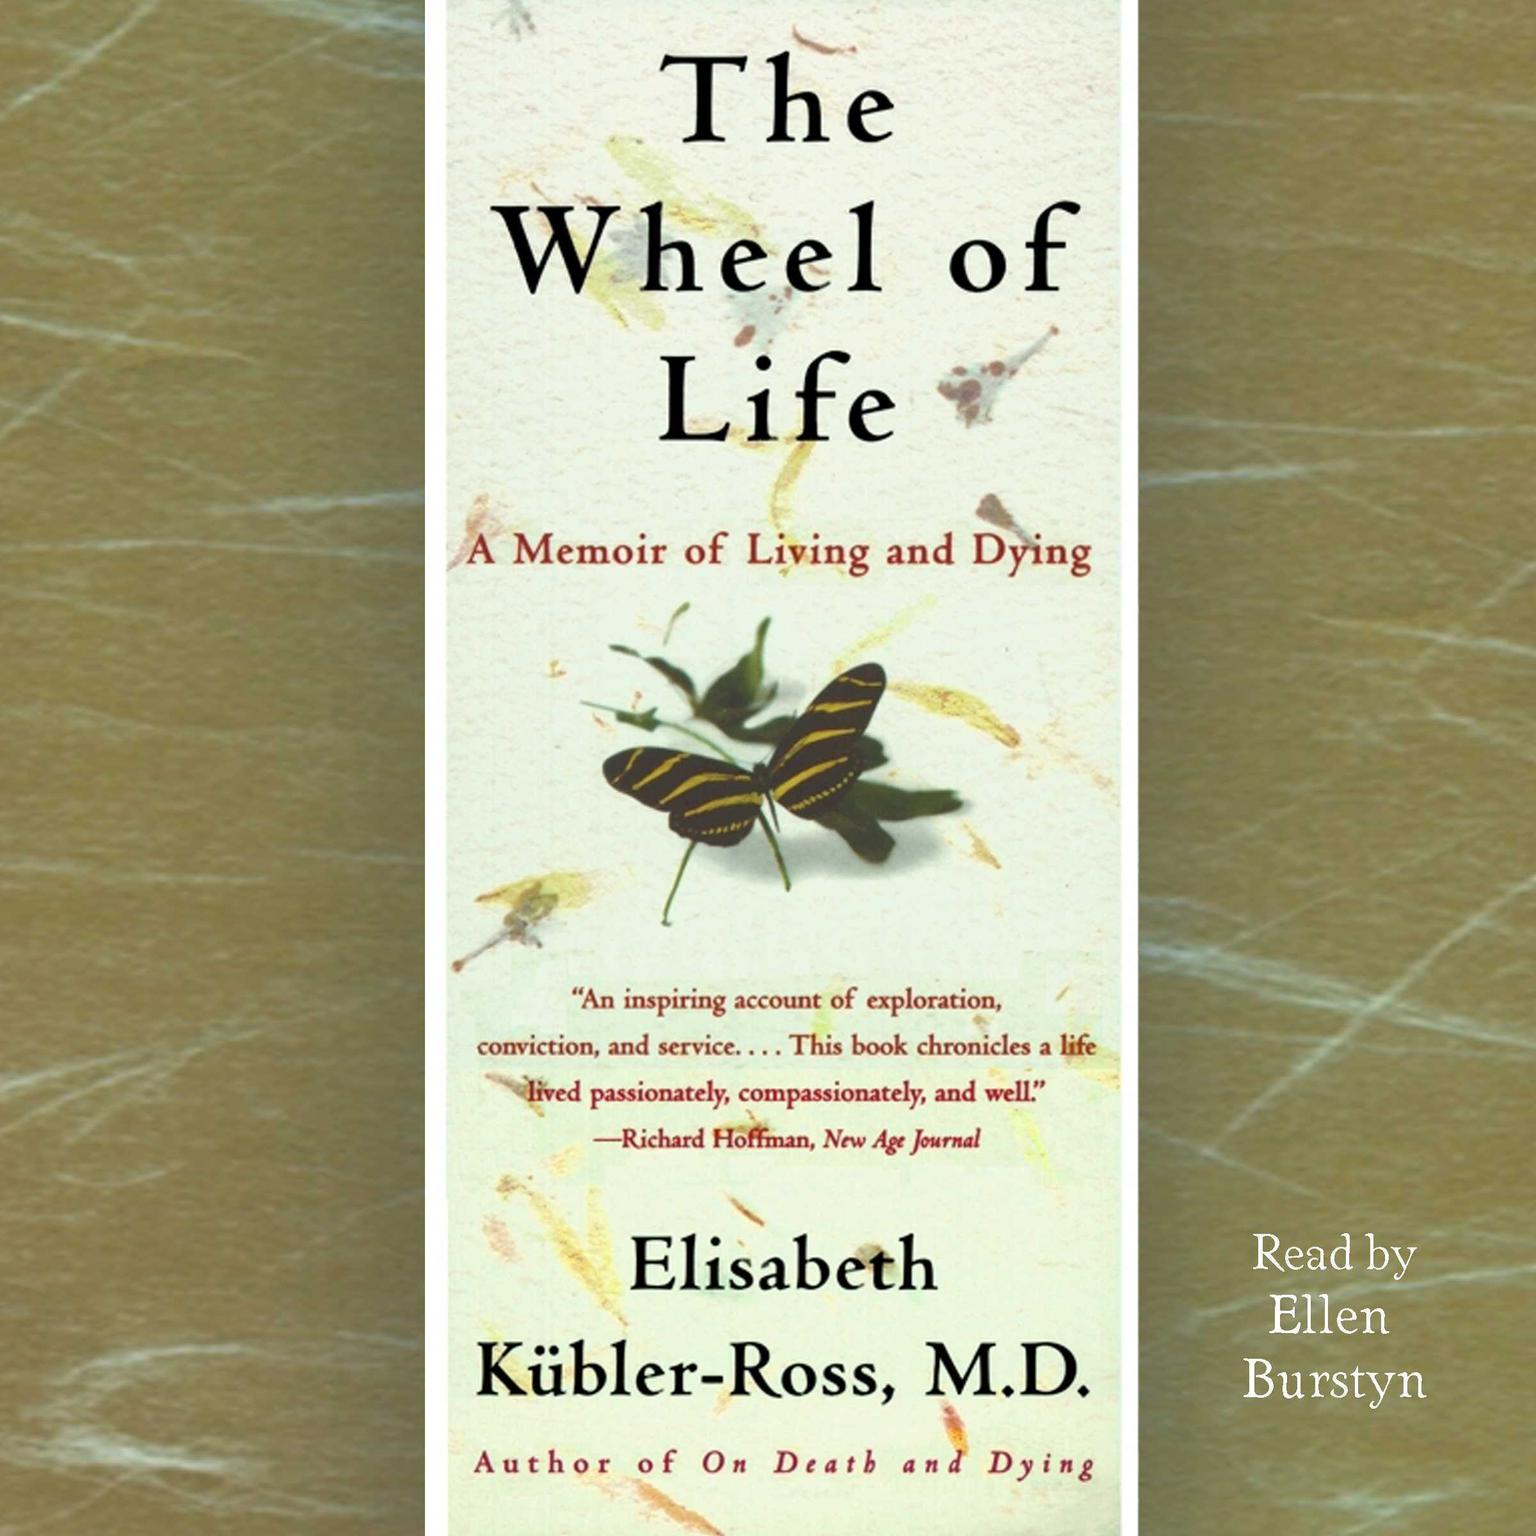 The Wheel of Life (Abridged): A Memoir of Living and Dying Audiobook, by Elisabeth Kübler-Ross